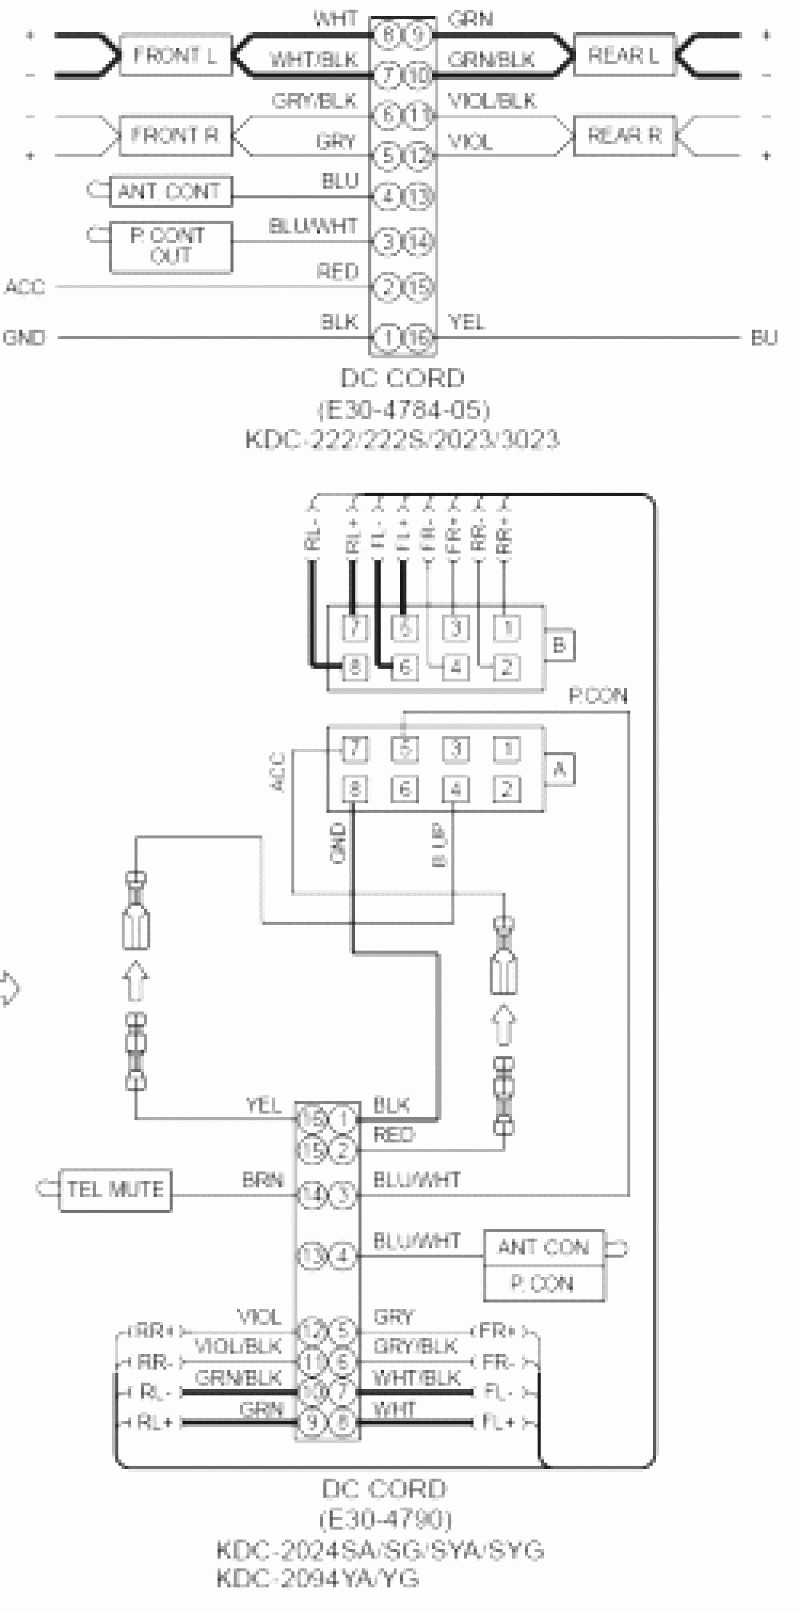 Full Size of Wiring Diagram Kenwood Kvt 514 Wiring Diagram New Funky Delco Model Wiring